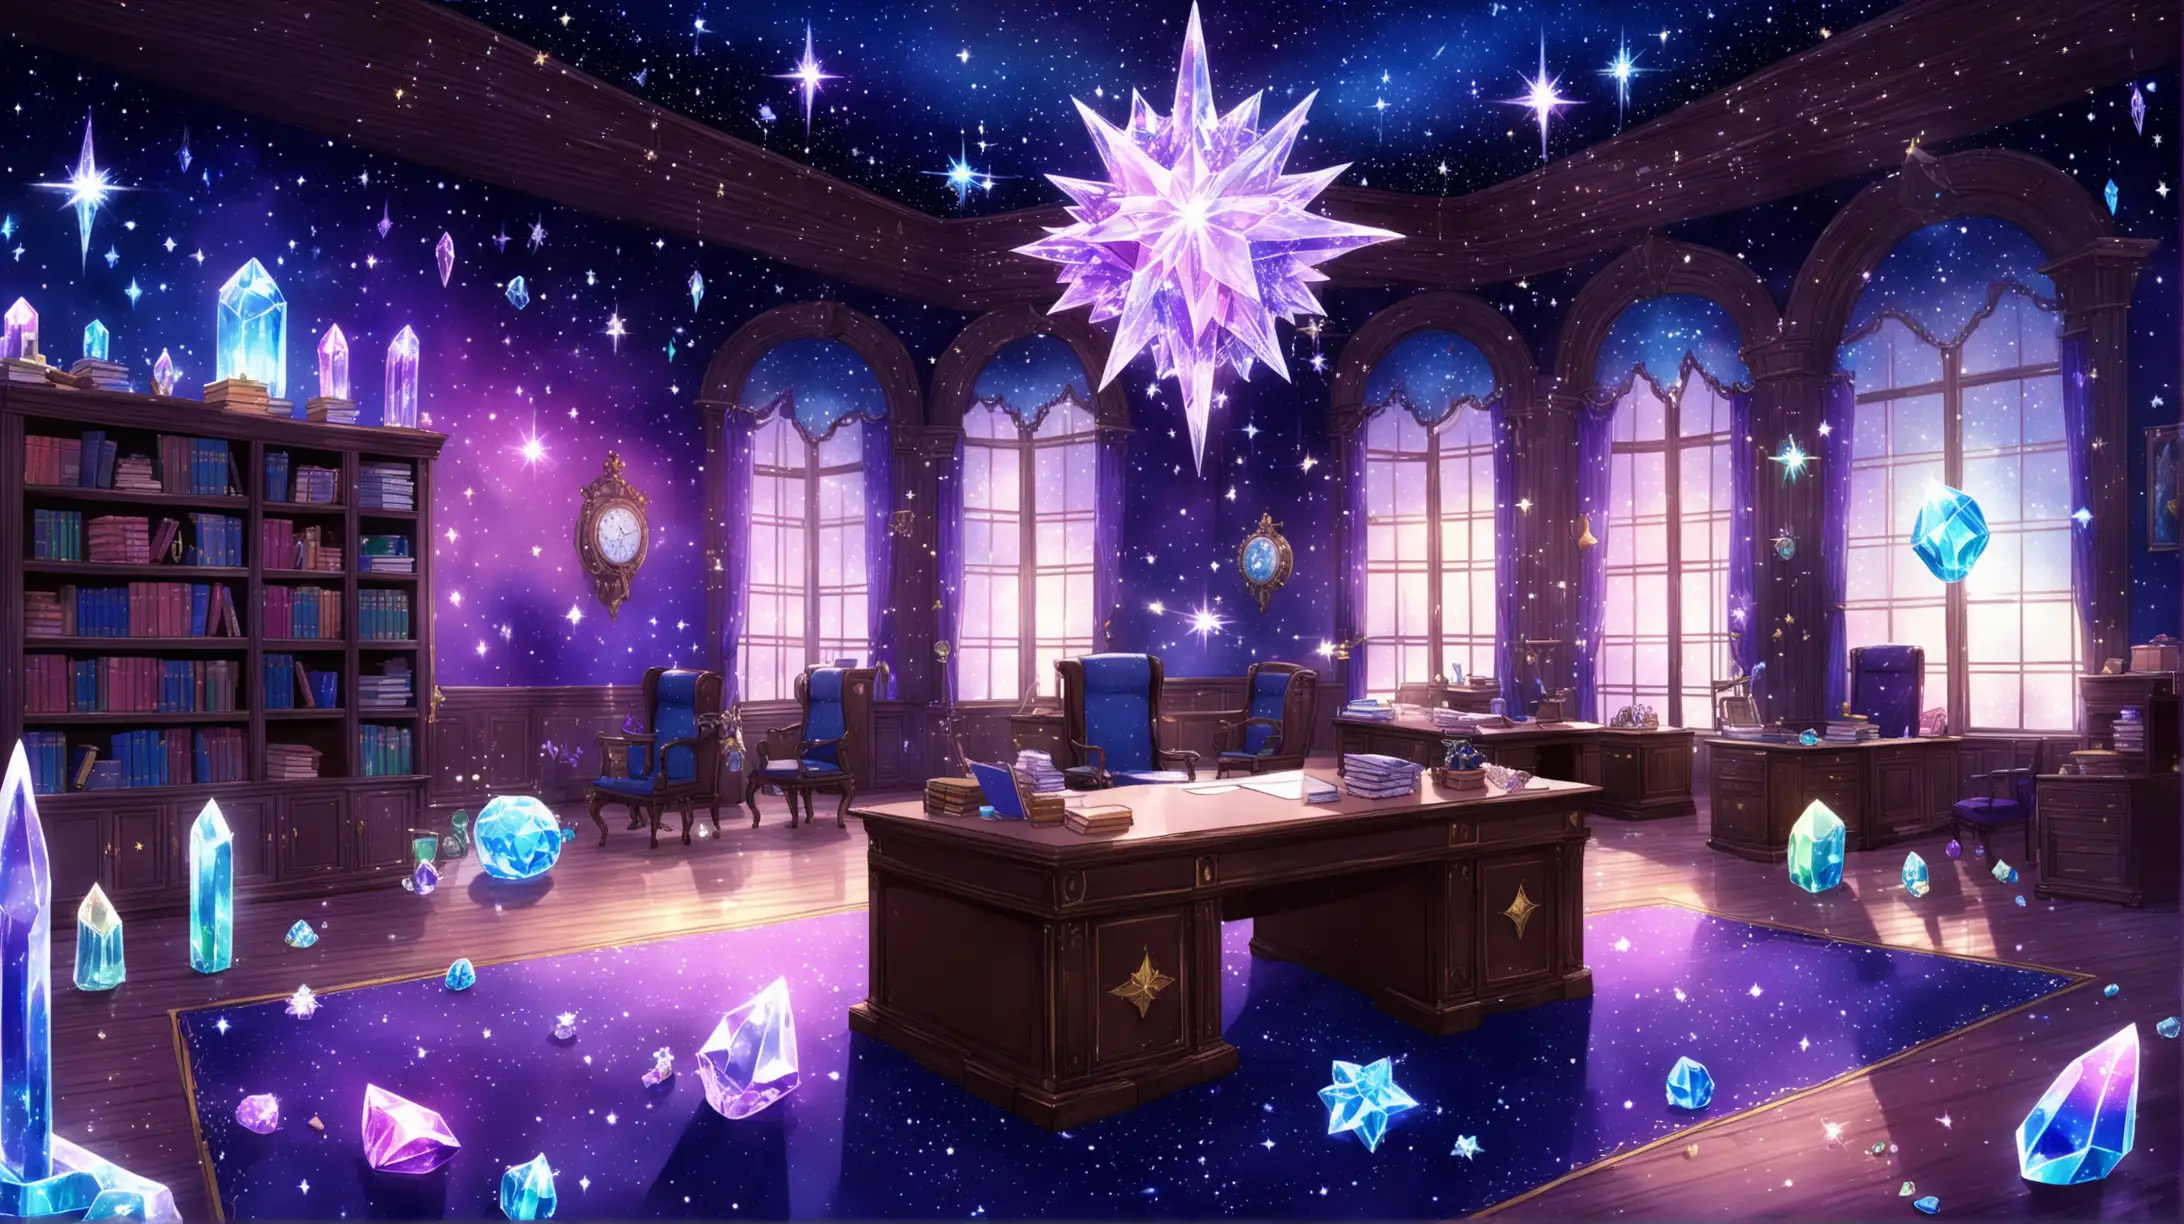 Principals Office in a Magical School with Stars and Crystals